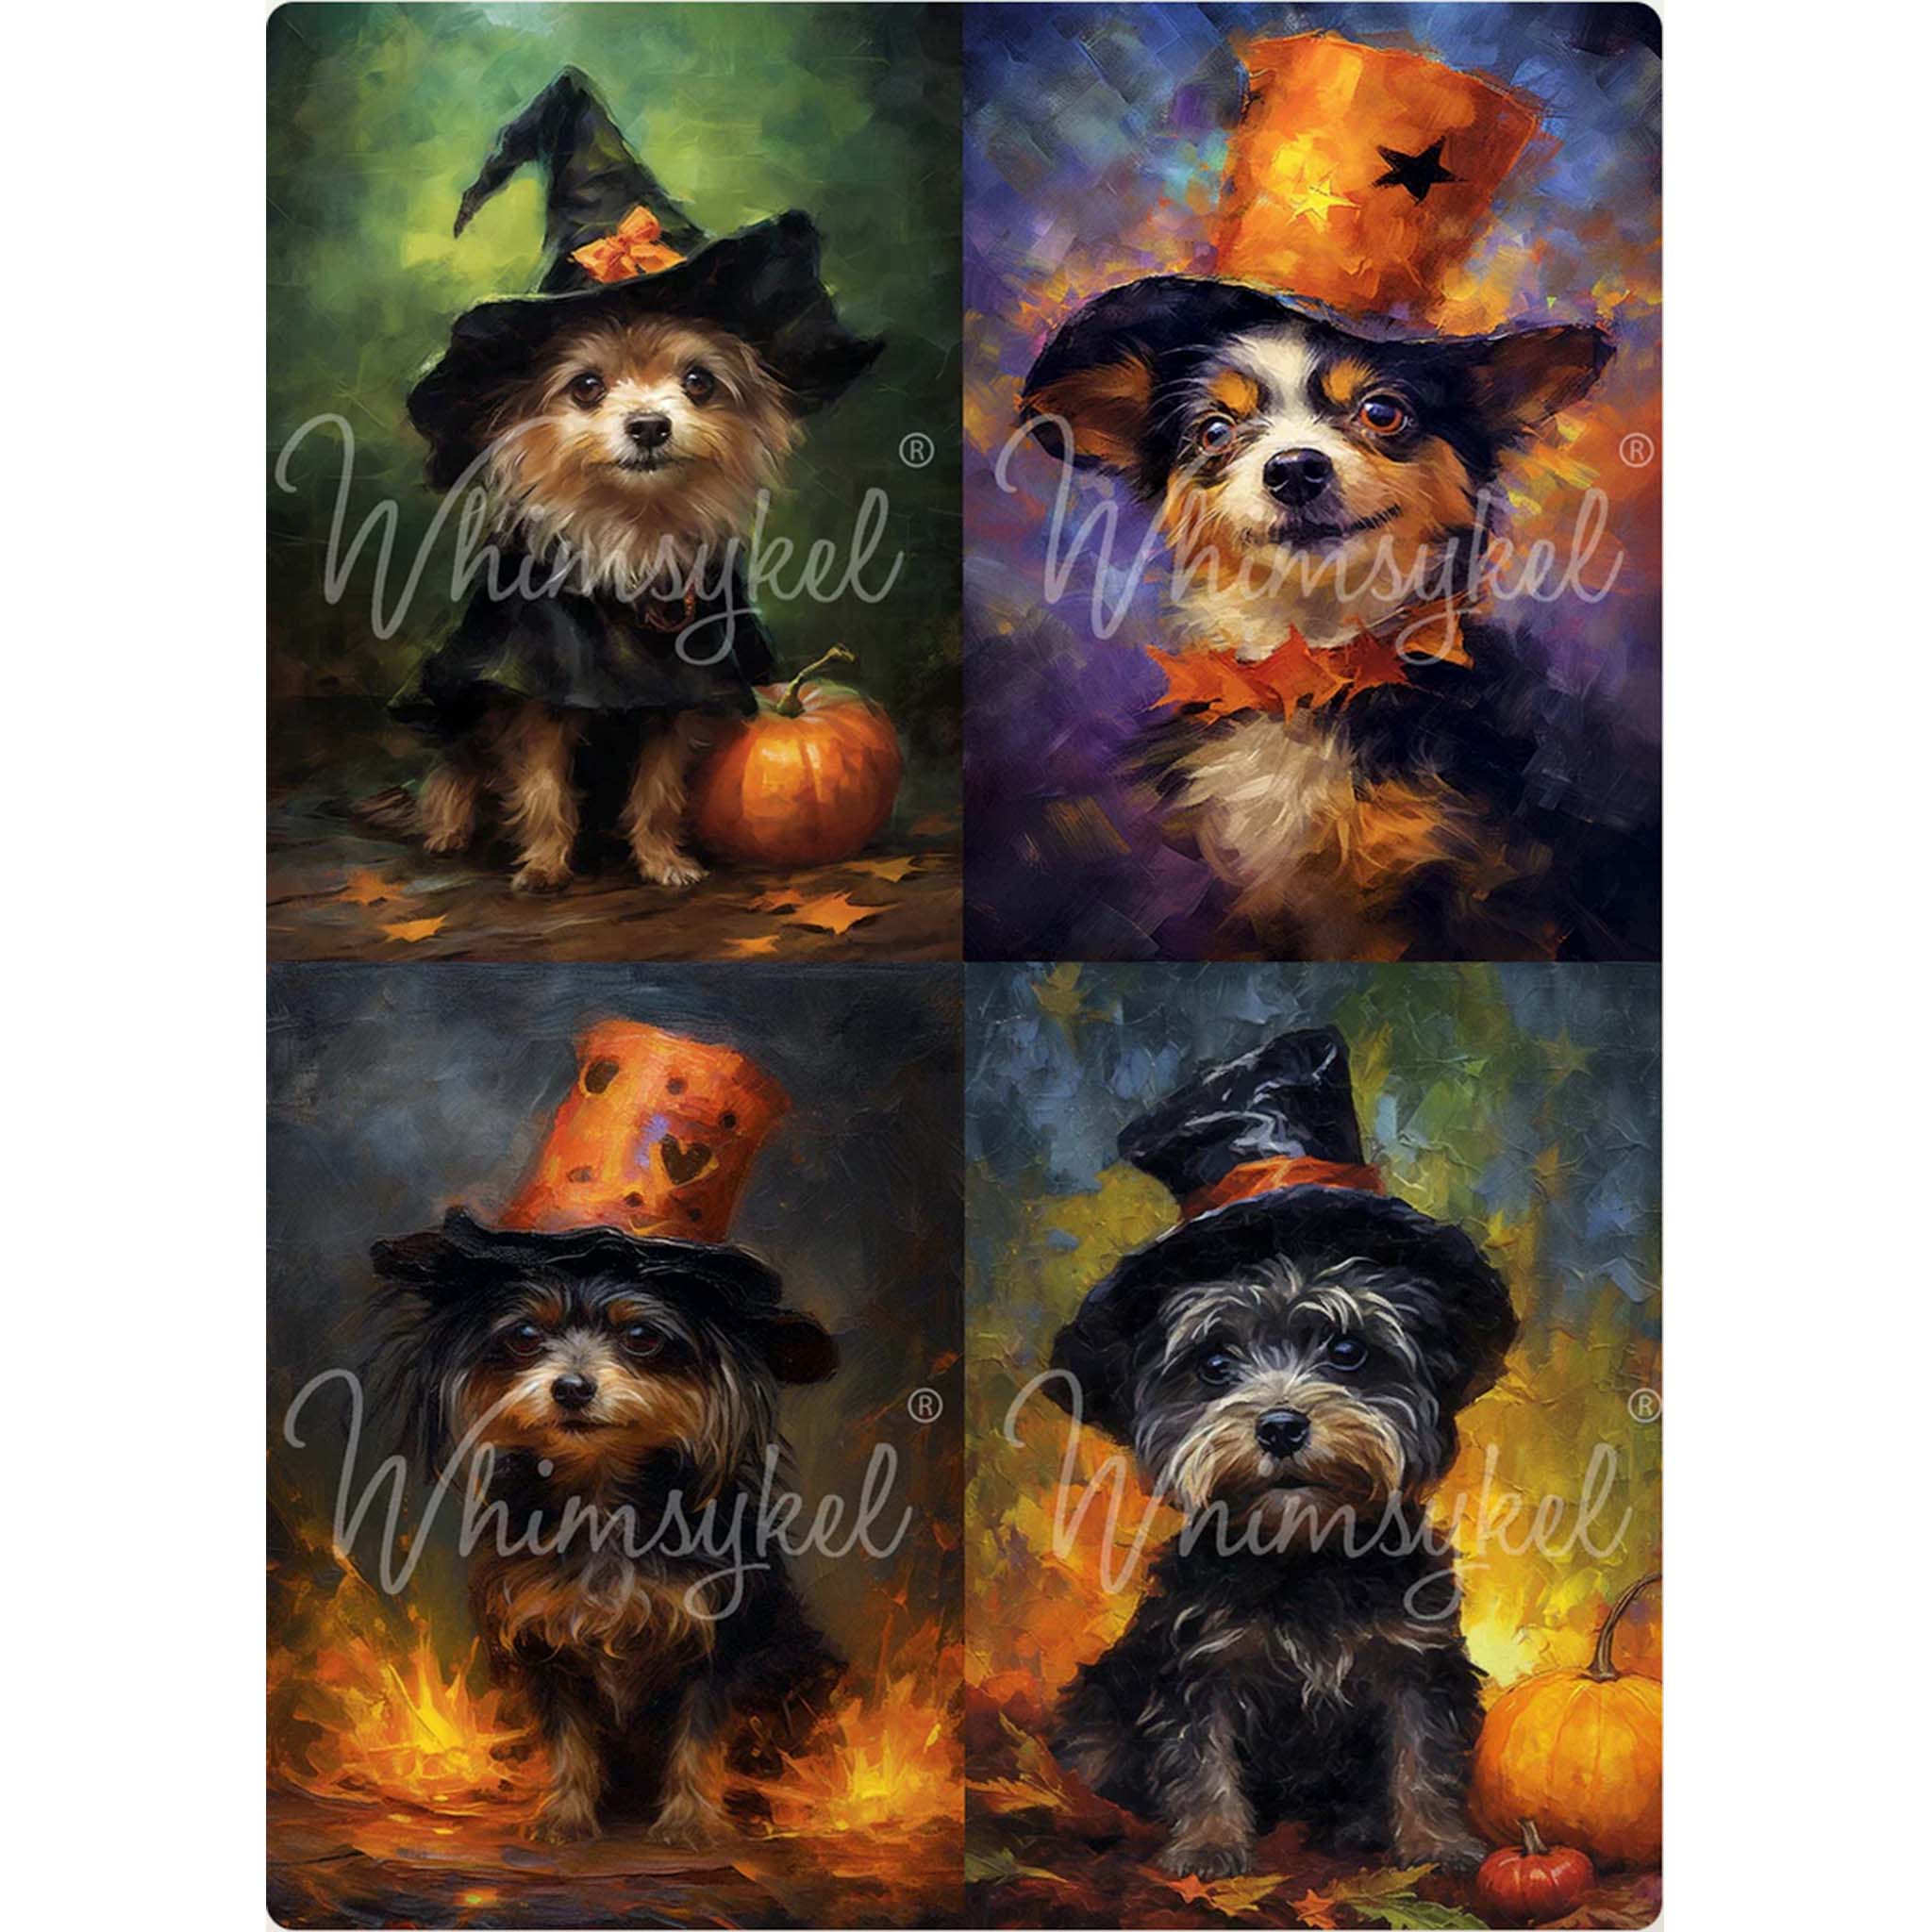 Tissue paper design that features 4 adorable paintings of puppies in Halloween hats and costumes. White borders are on the sides.